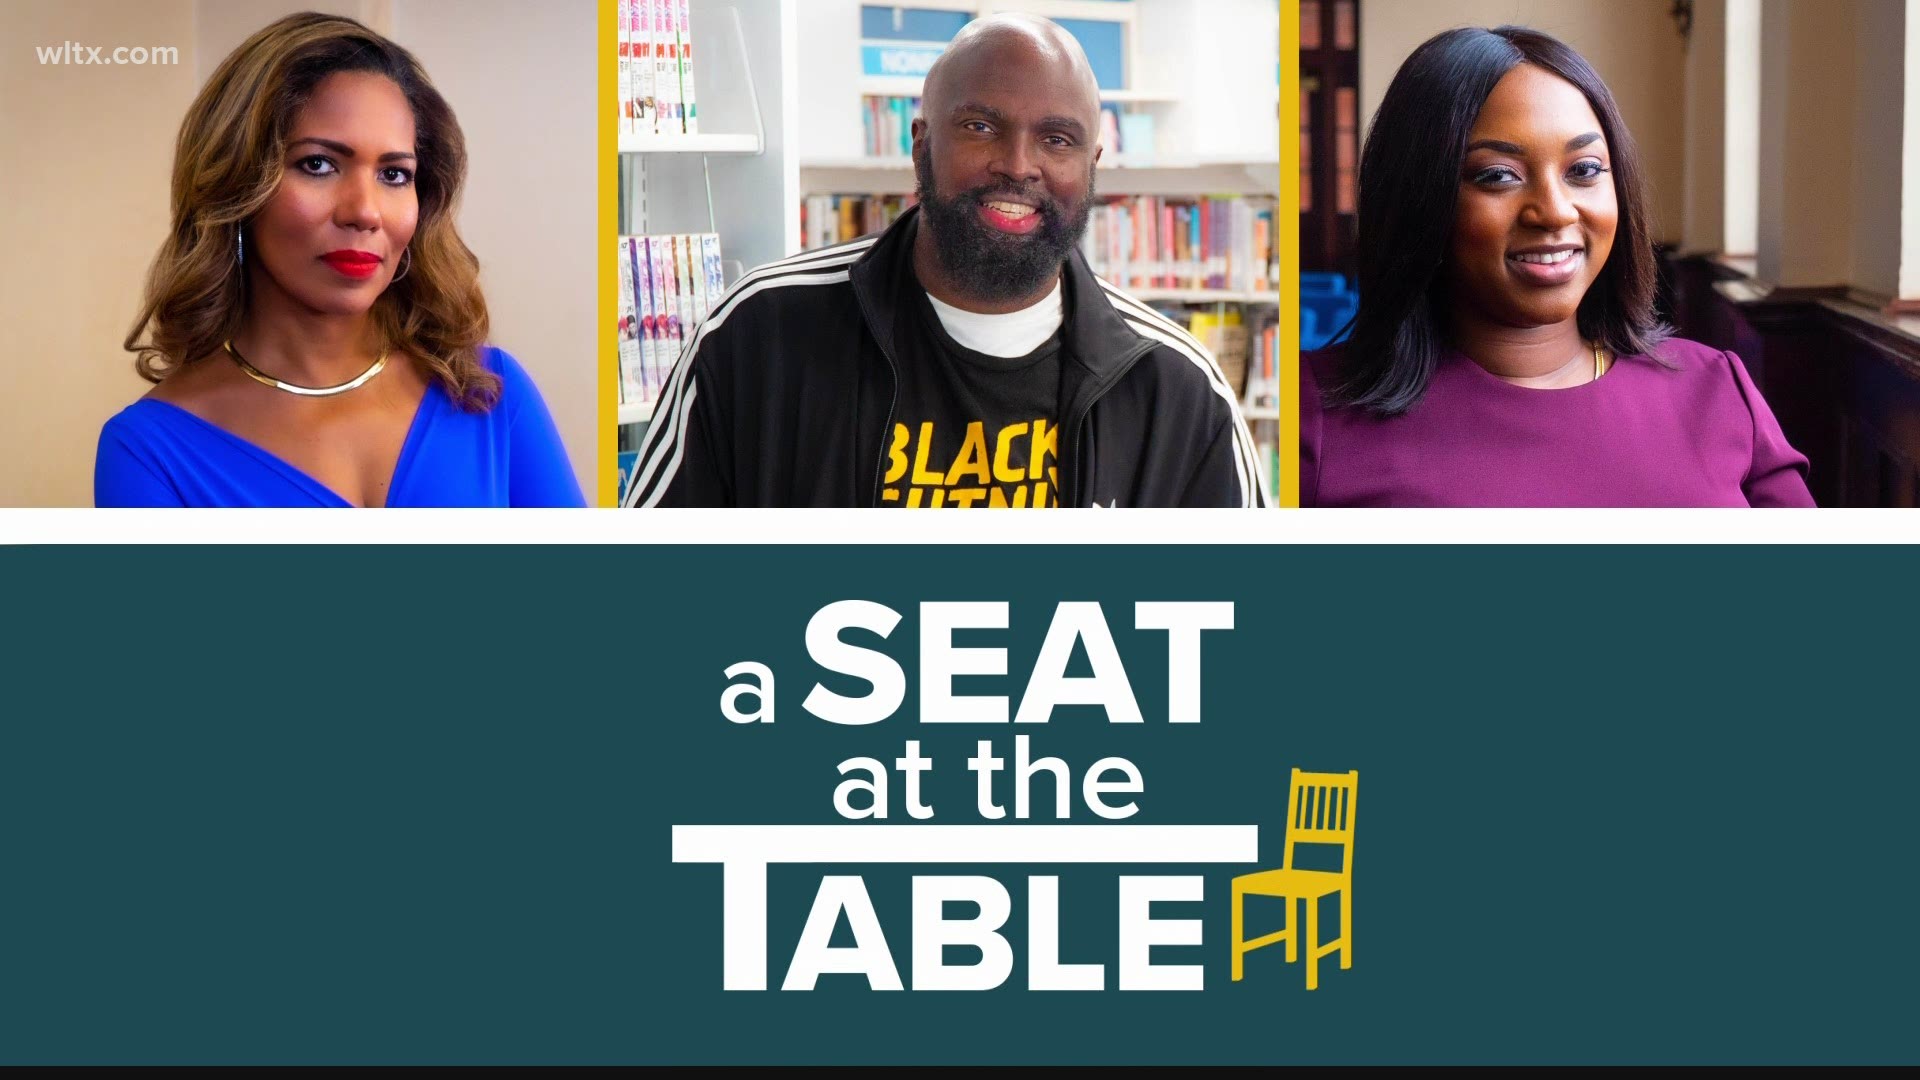 It's a series of reports called 'A Seat at the Table', where we will amplify the voices of black people affecting change, in our community--today.